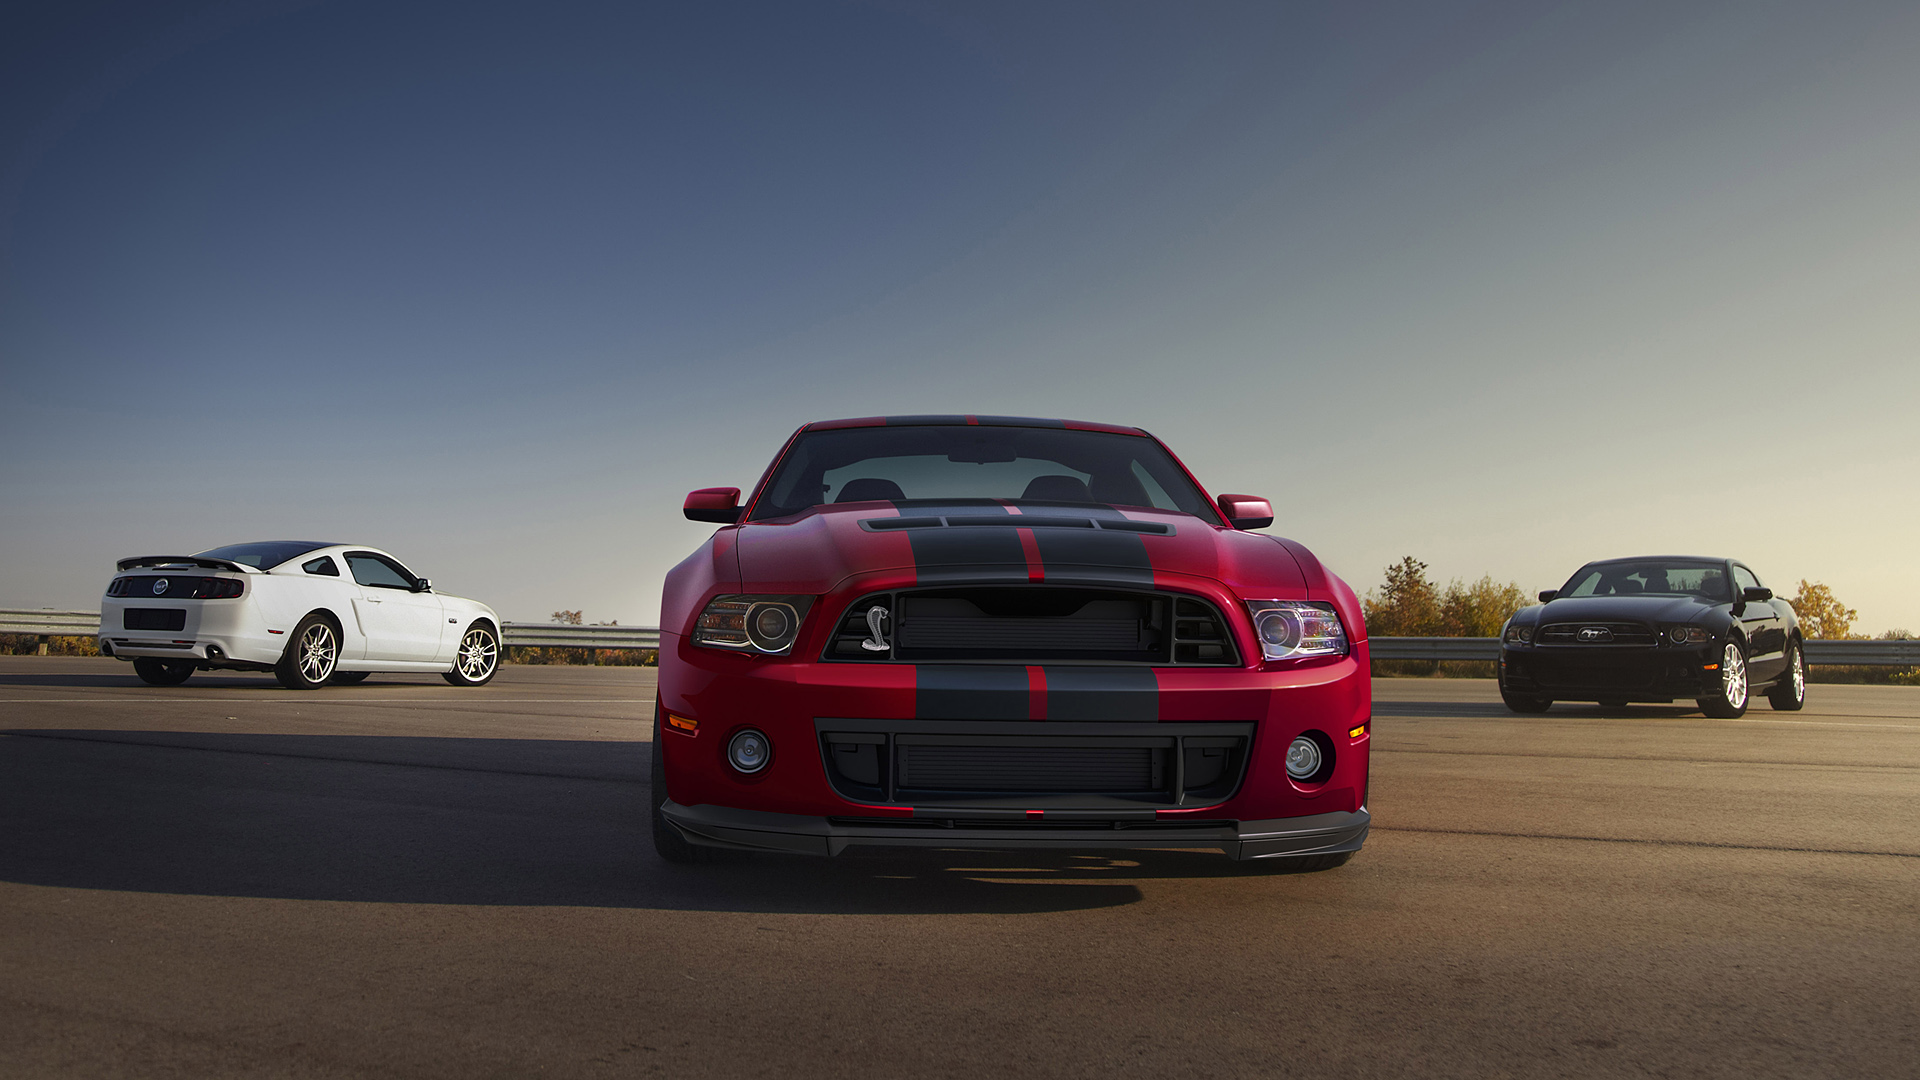  2014 Ford Shelby Mustang GT500 Wallpaper.